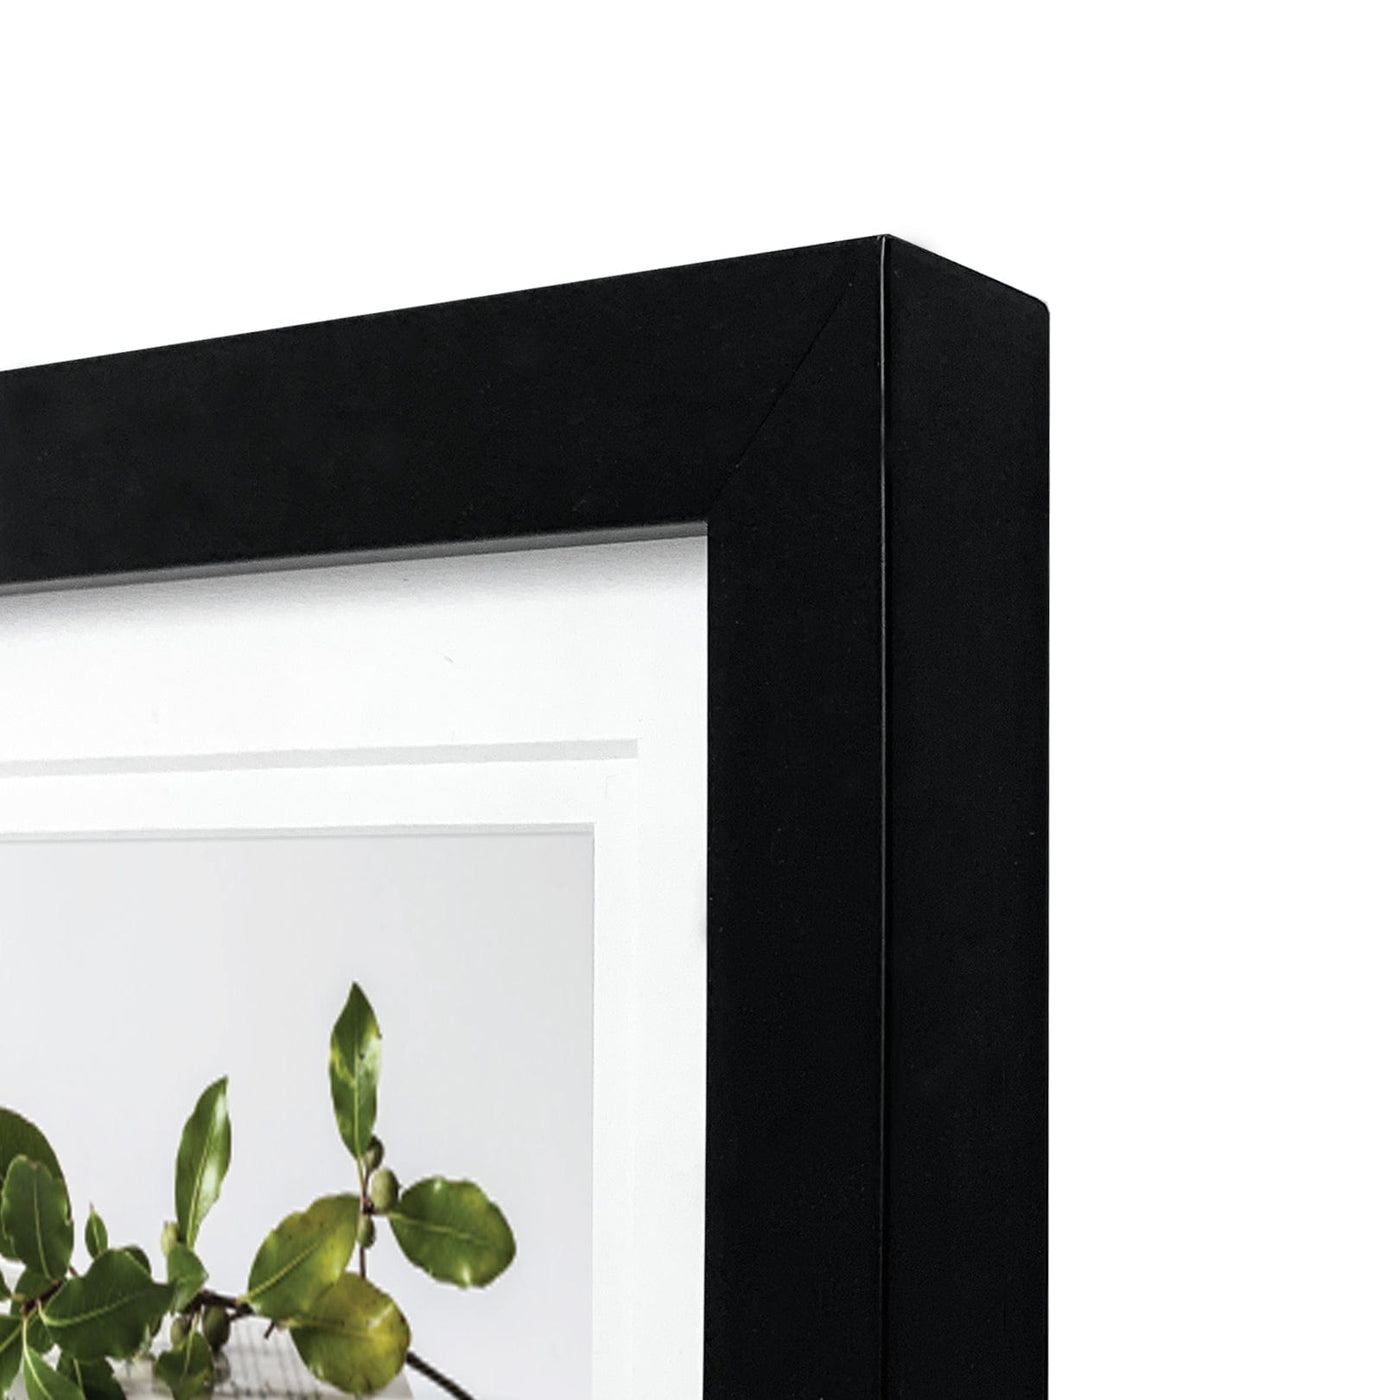 Deluxe Gallery Photo Wall Frame Set B - 6 Frames from our Australian Made Gallery Photo Wall Frame Sets collection by Profile Products Australia